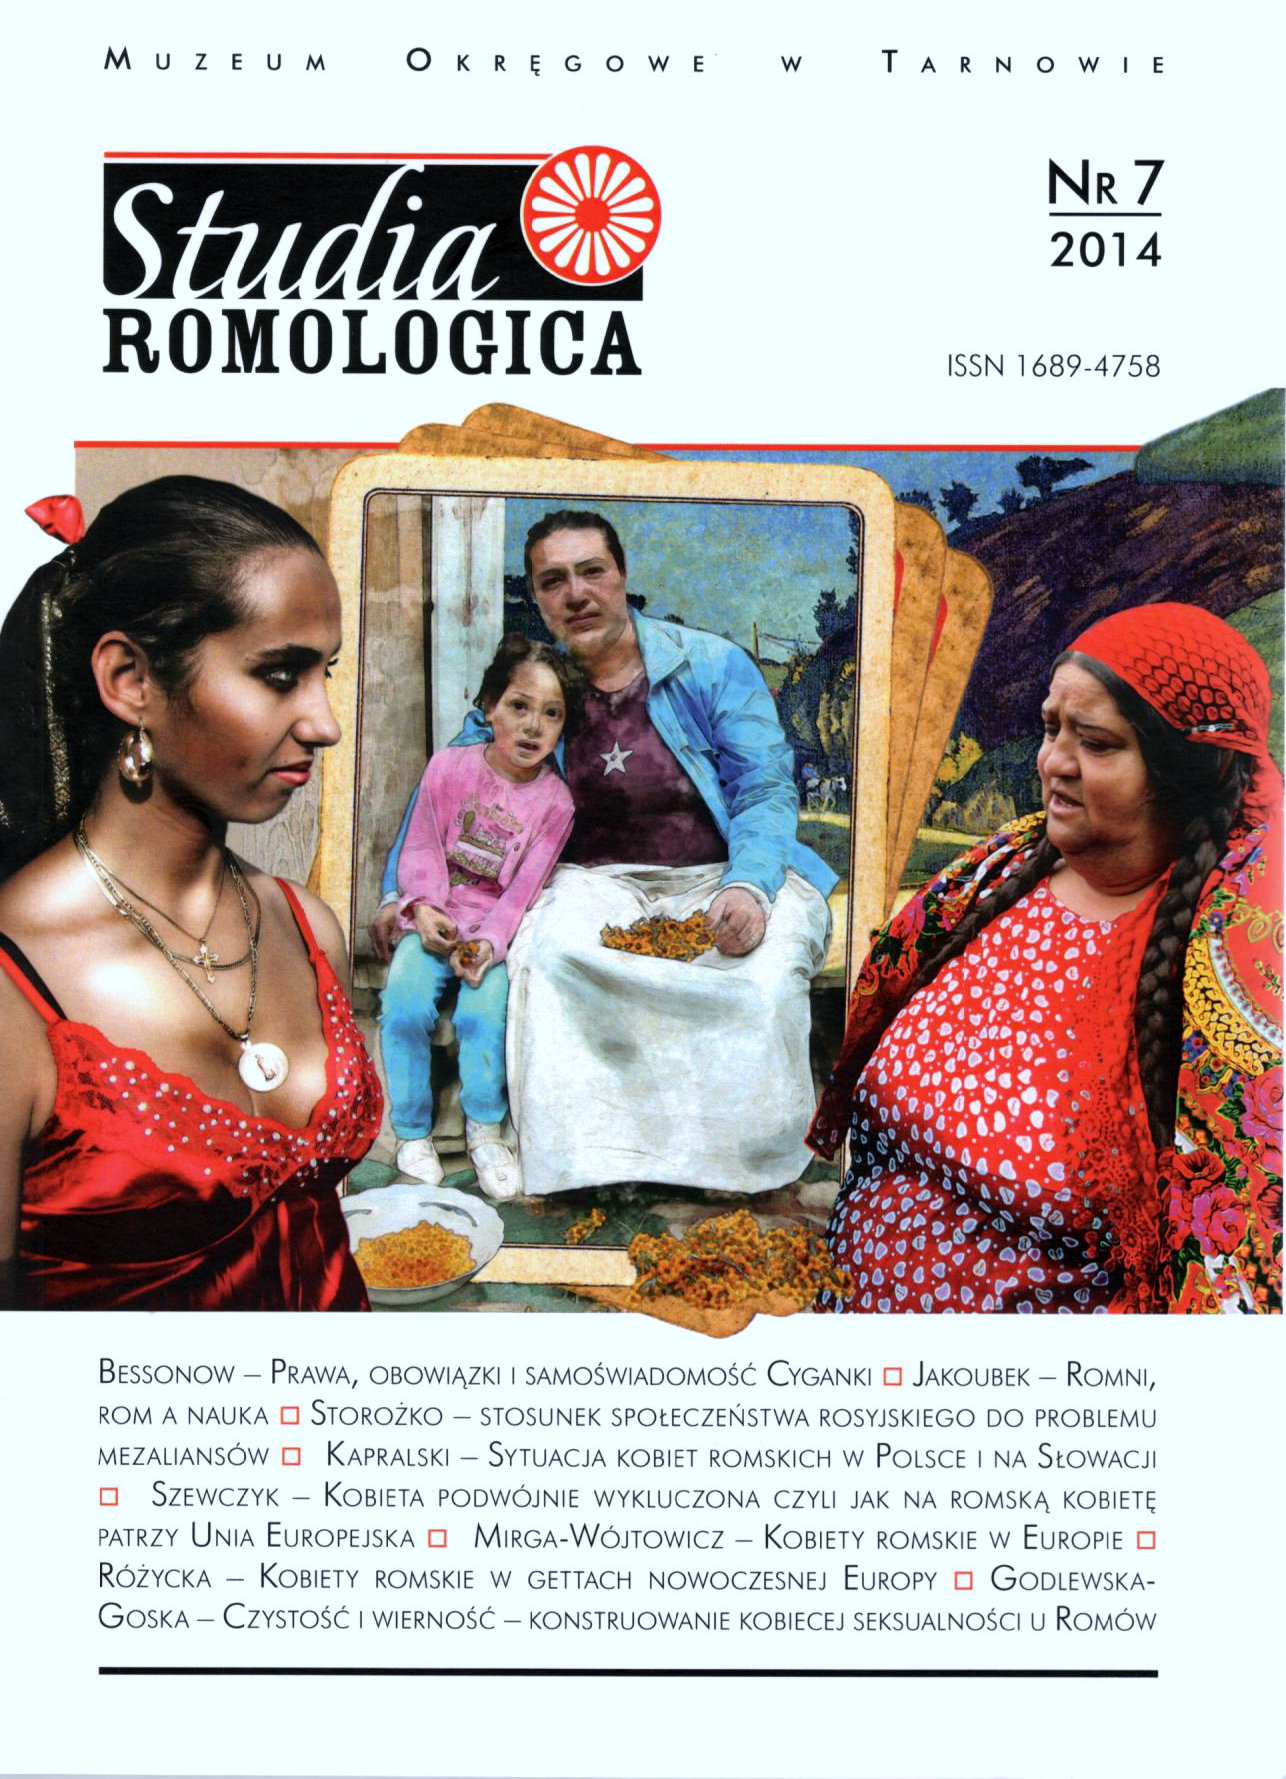 The situation of Roma women in Poland and Slovakia according to the Roma women’s activists Cover Image